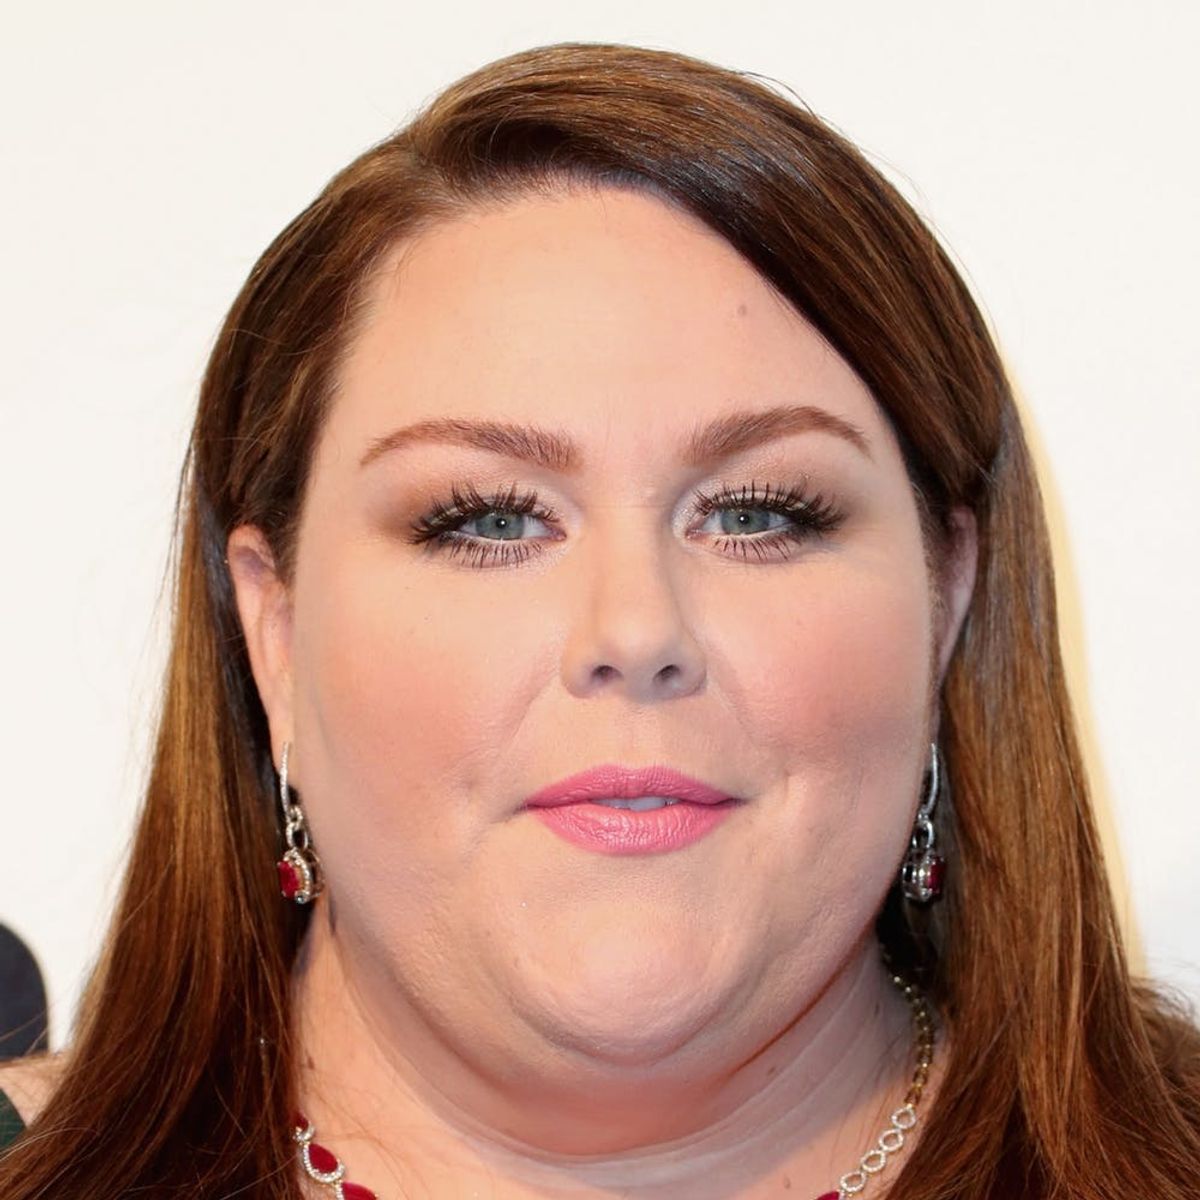 Chrissy Metz: “The Red Carpet Changed How I Dress”